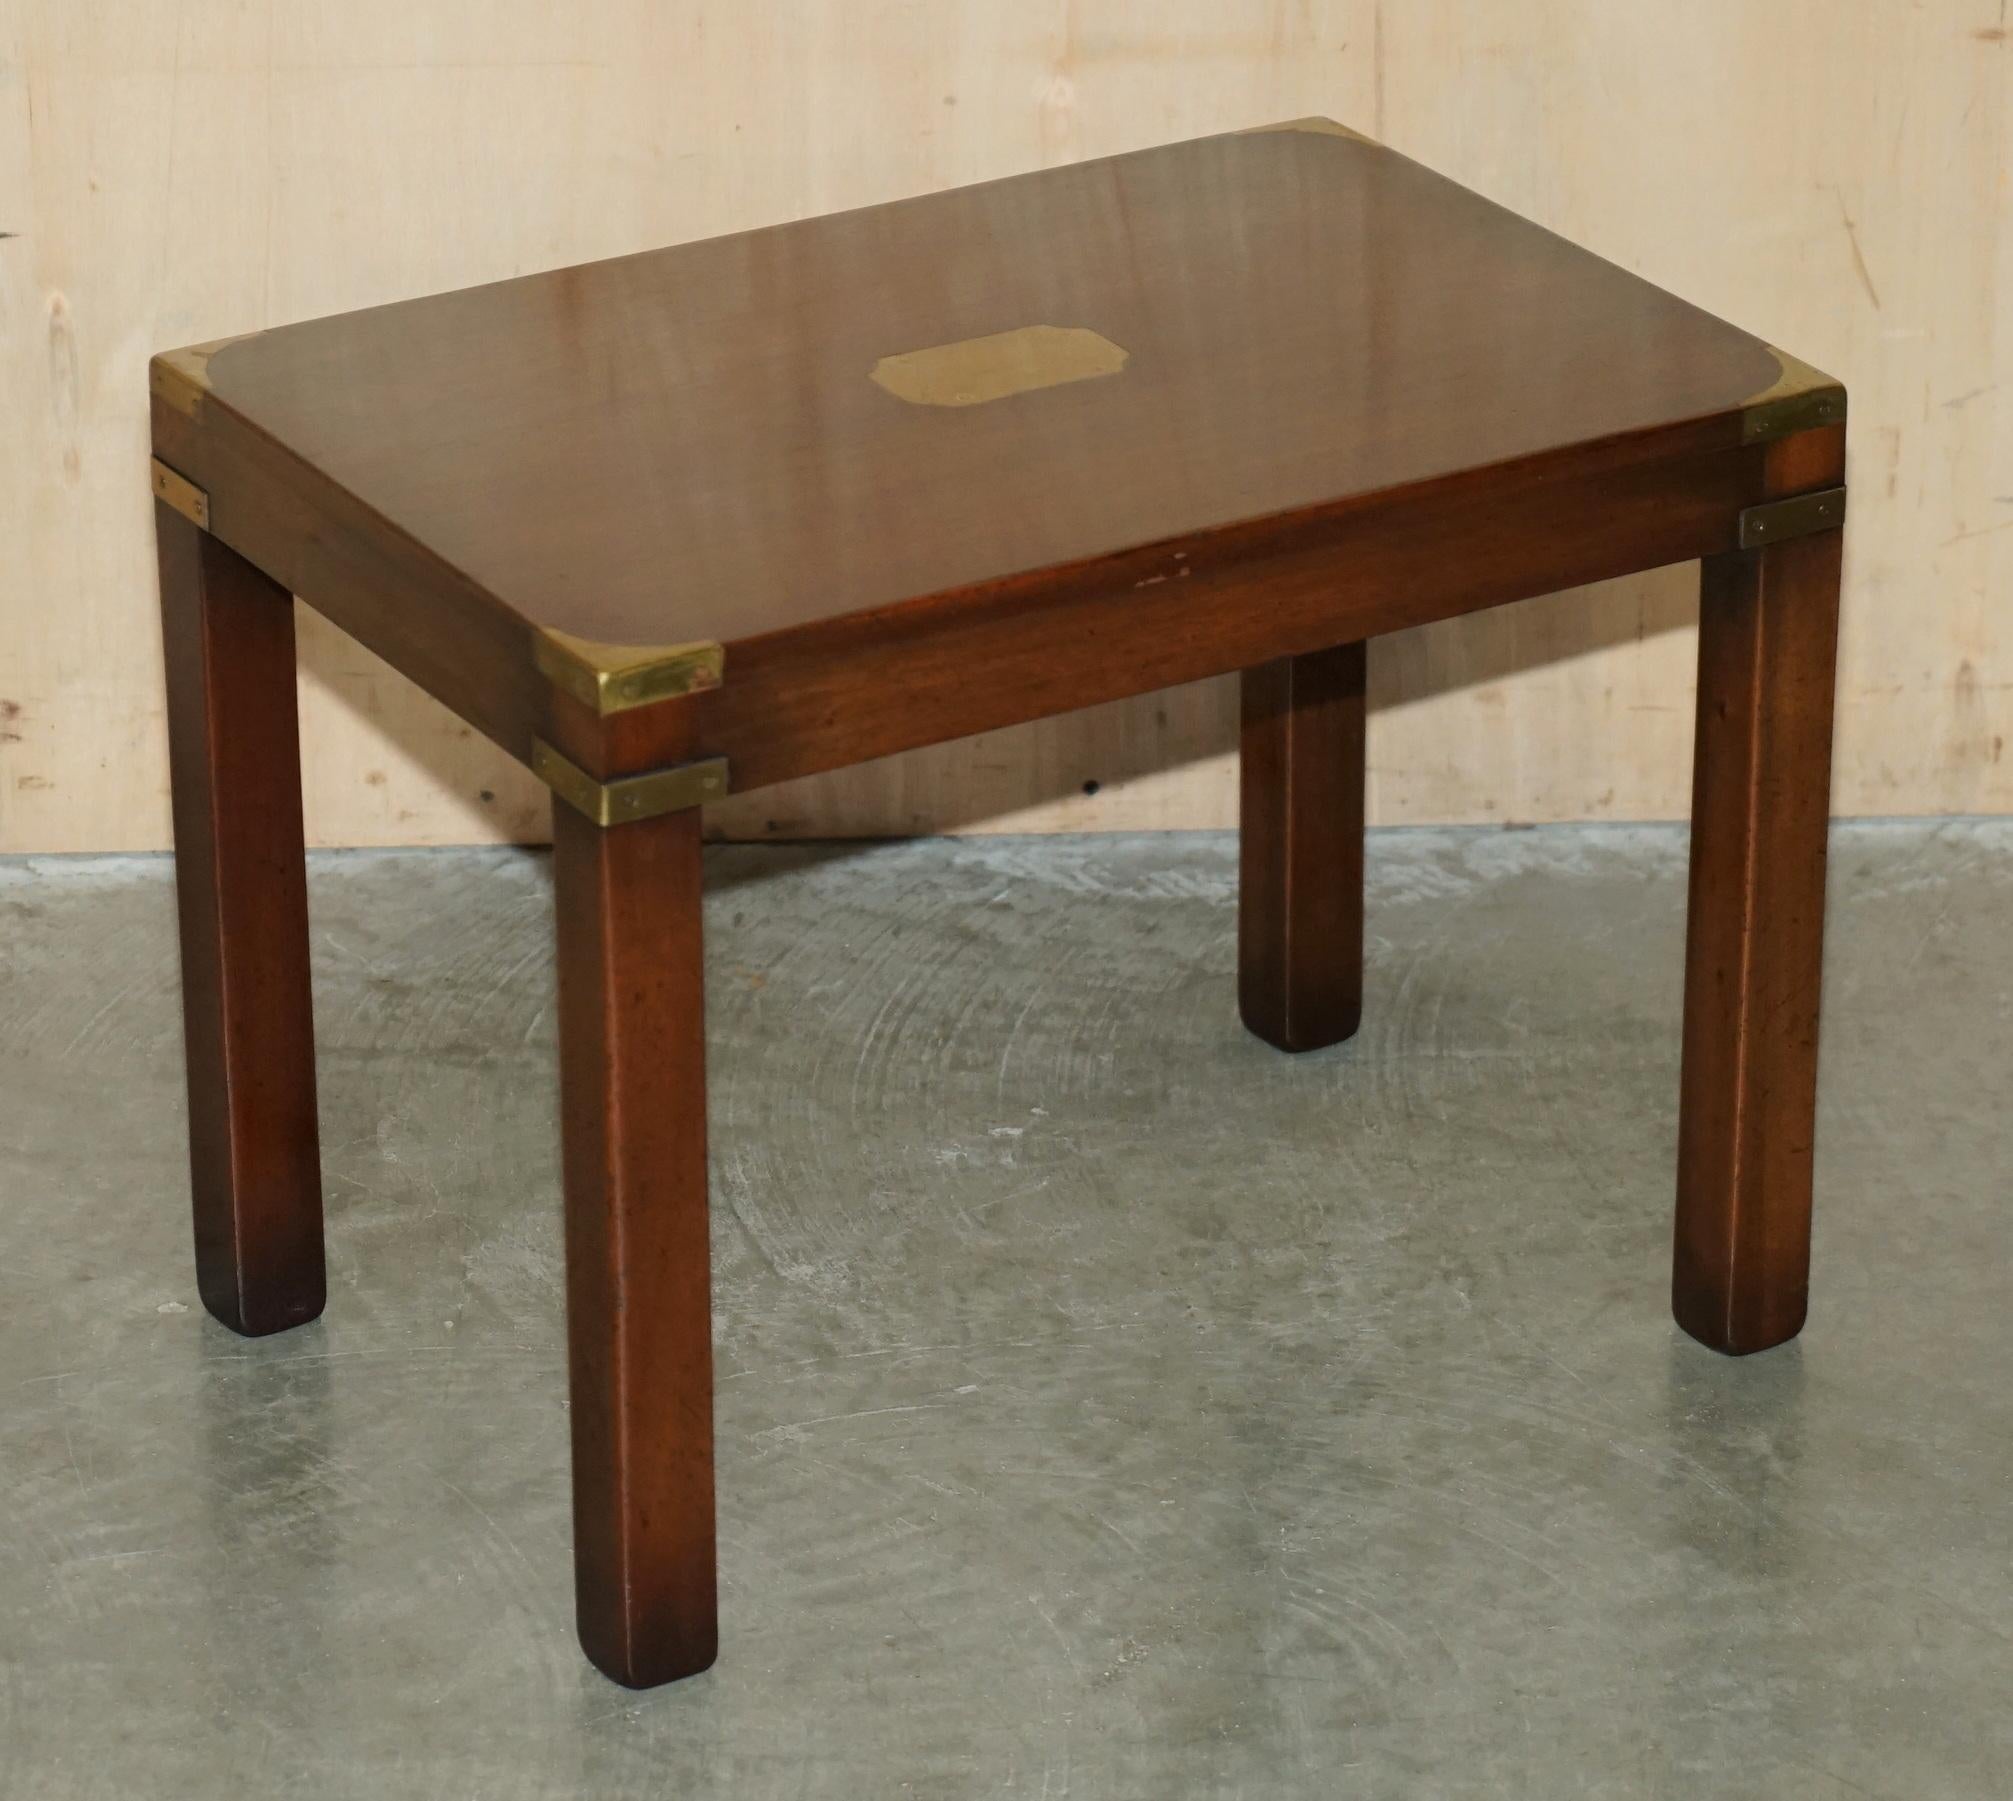 RESTORED HARRODS KENNEDY COFFEE & SiDE TABLE NEST OF TABLES MILITARY CAMPAIGN im Angebot 8